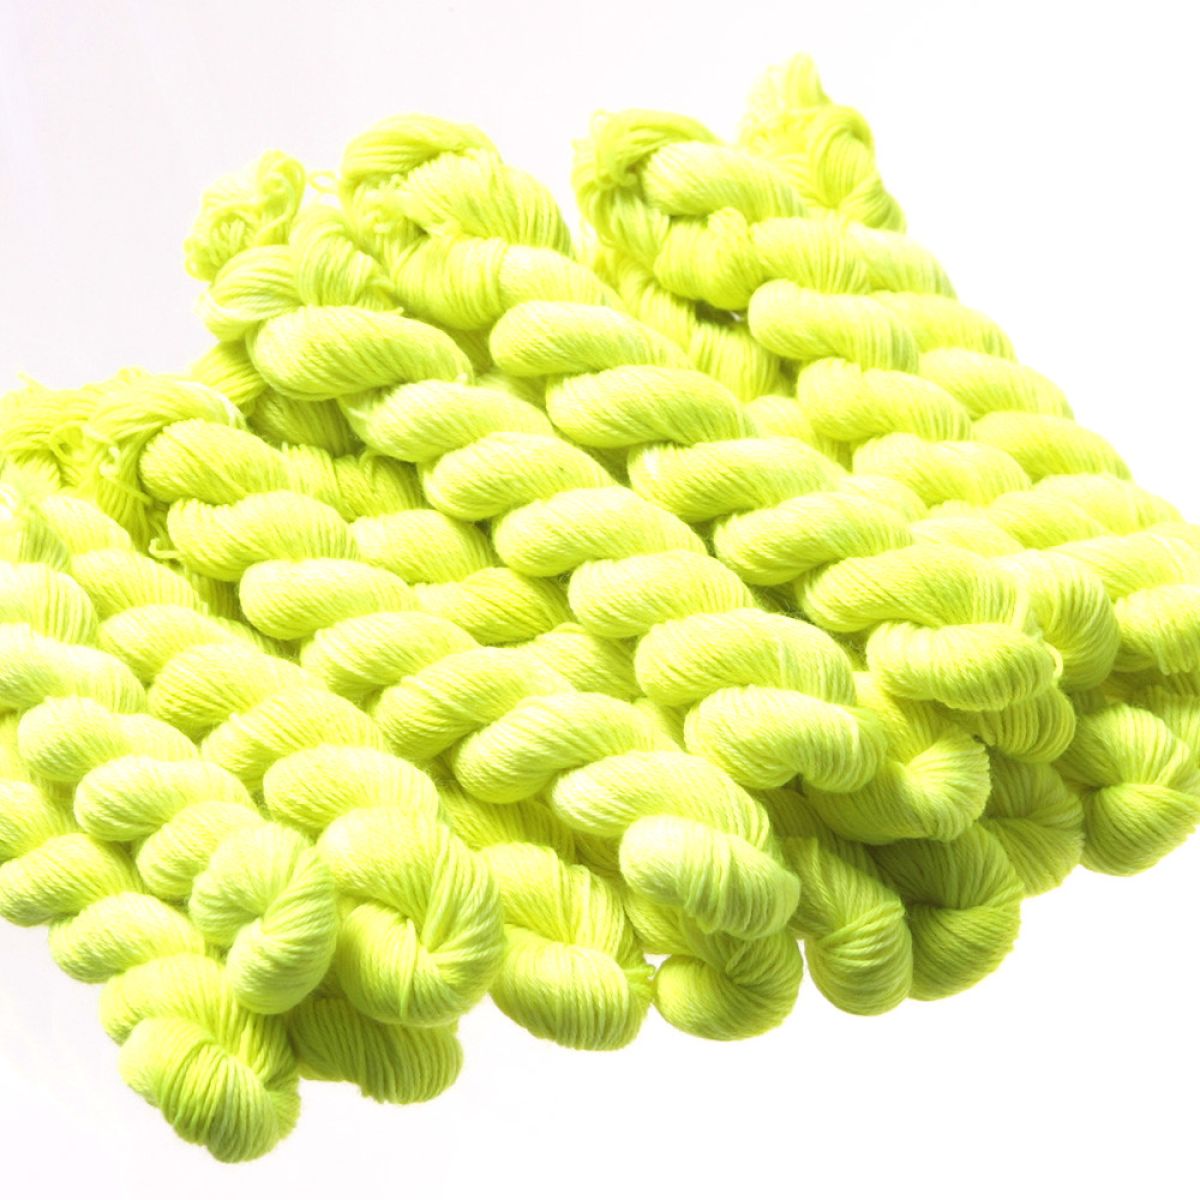 Very bright fluorescent yellow clothing fiber wound together in bundles against a white background